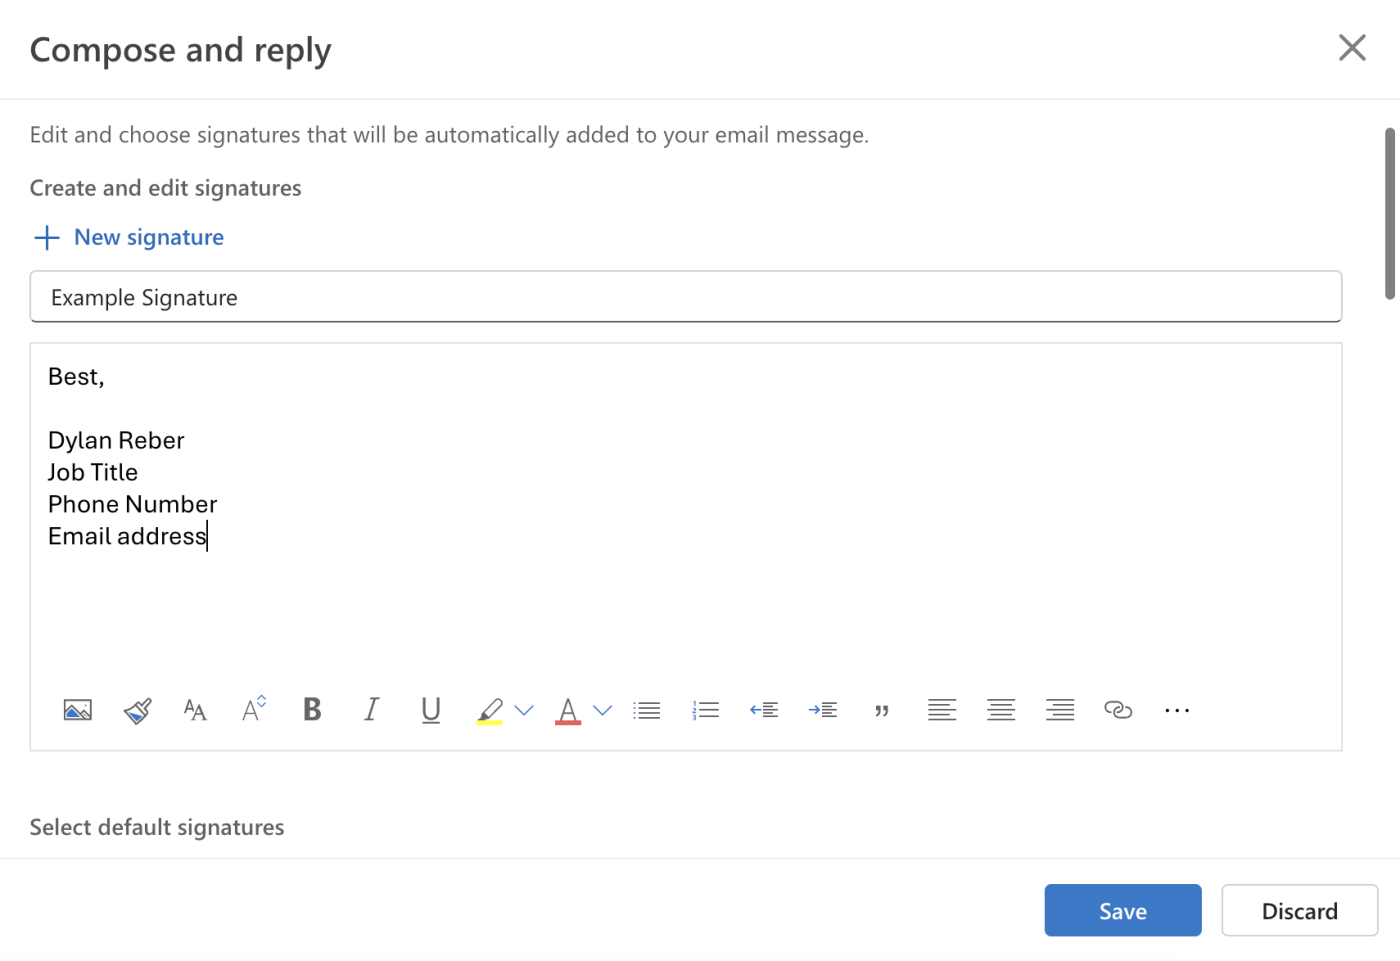 Screenshot of where to type in a new email signature and save it in Outlook.com